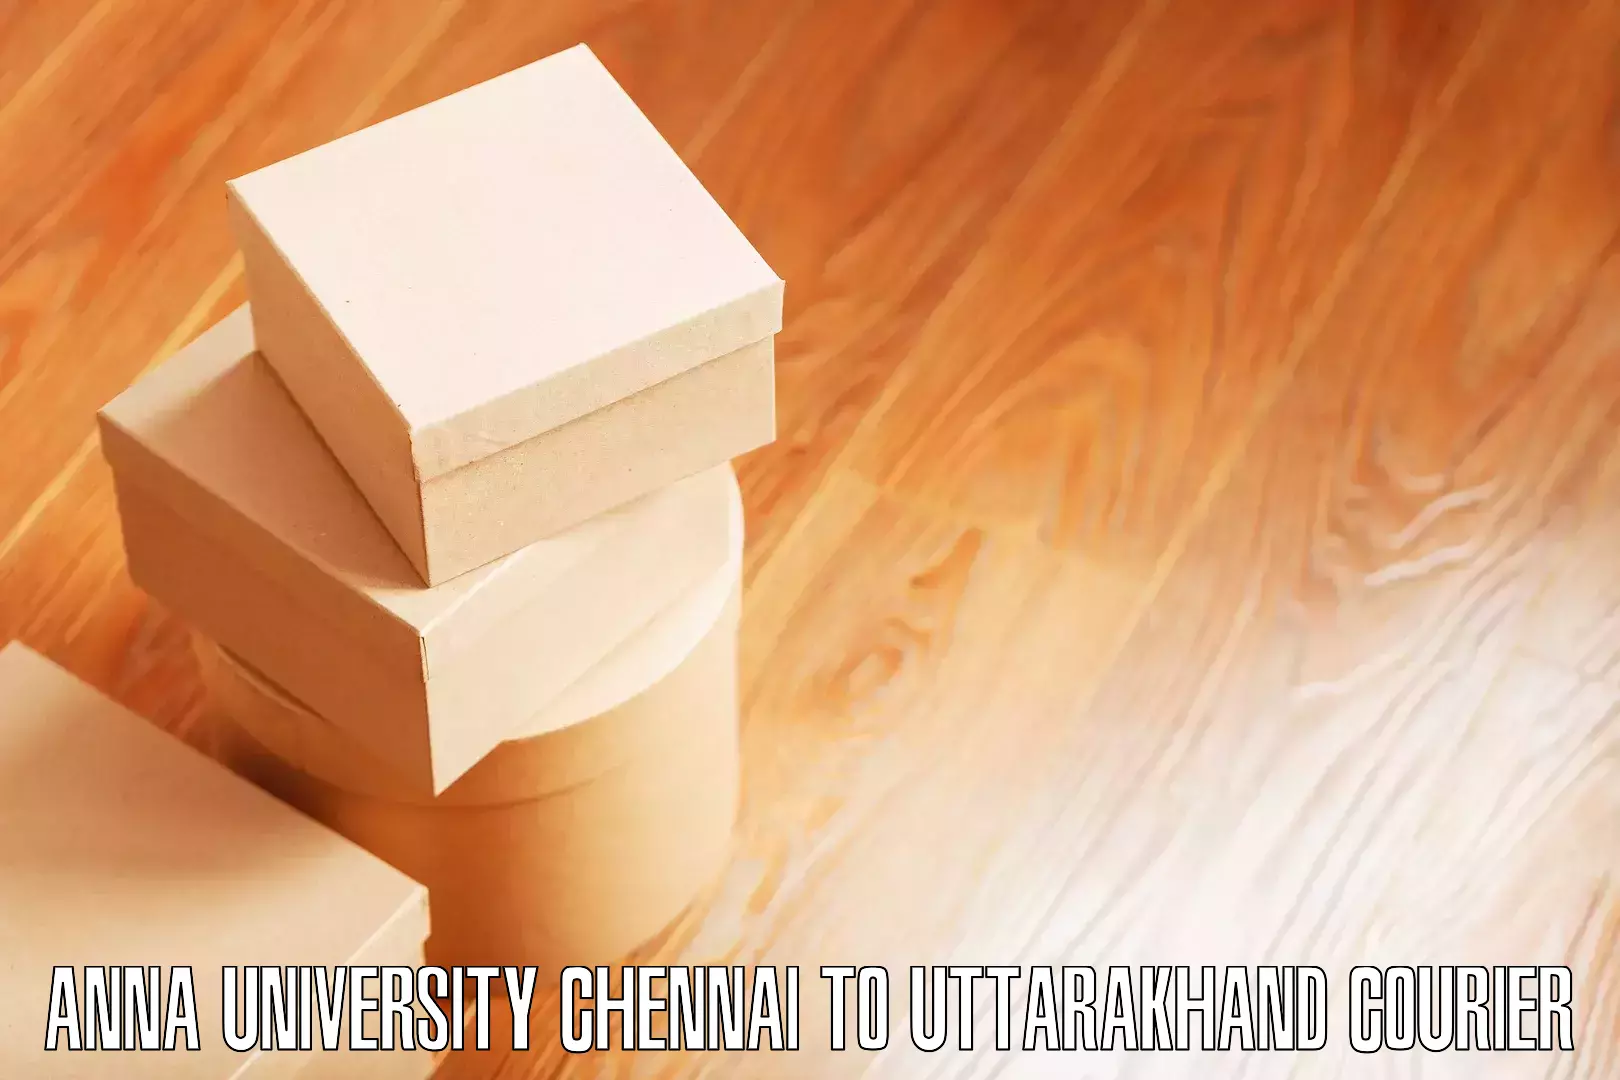 Affordable relocation services Anna University Chennai to Bageshwar